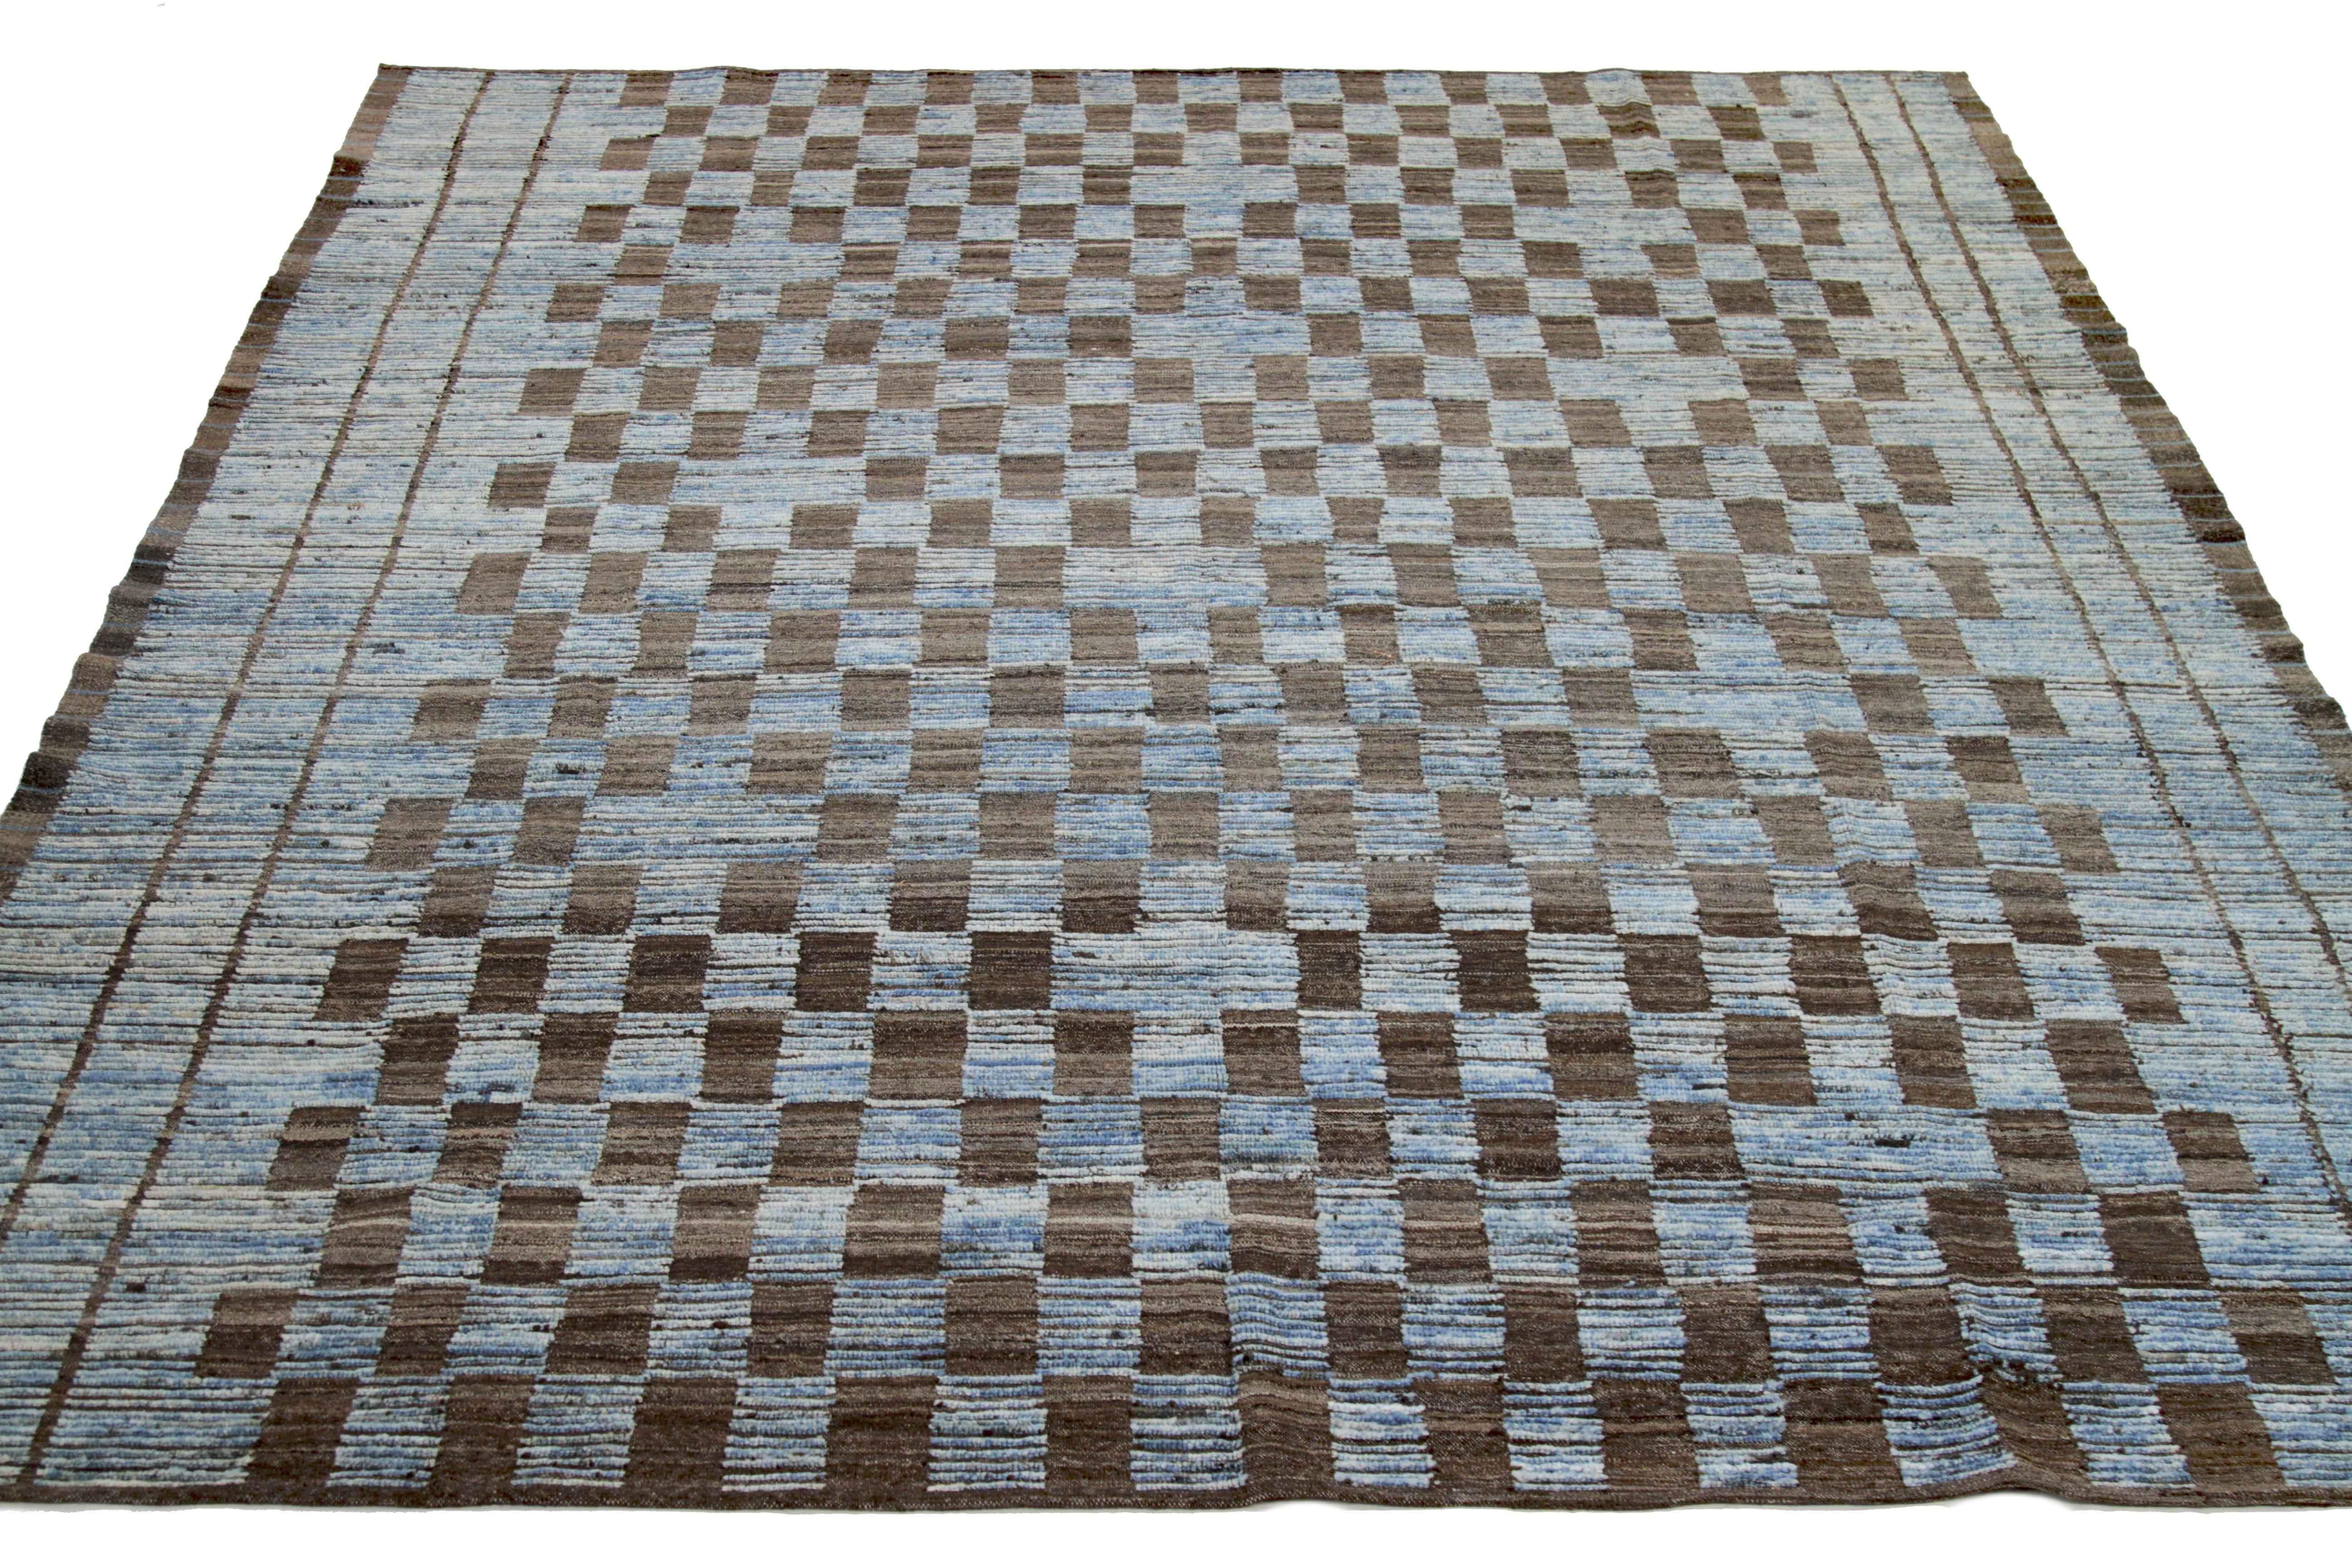 Modern Afghan rug handwoven from the finest sheep’s wool. It’s colored with all-natural vegetable dyes that are safe for humans and pets. This piece is a traditional Afghan weaving featuring a Moroccan inspired design. It’s highlighted by brown tile